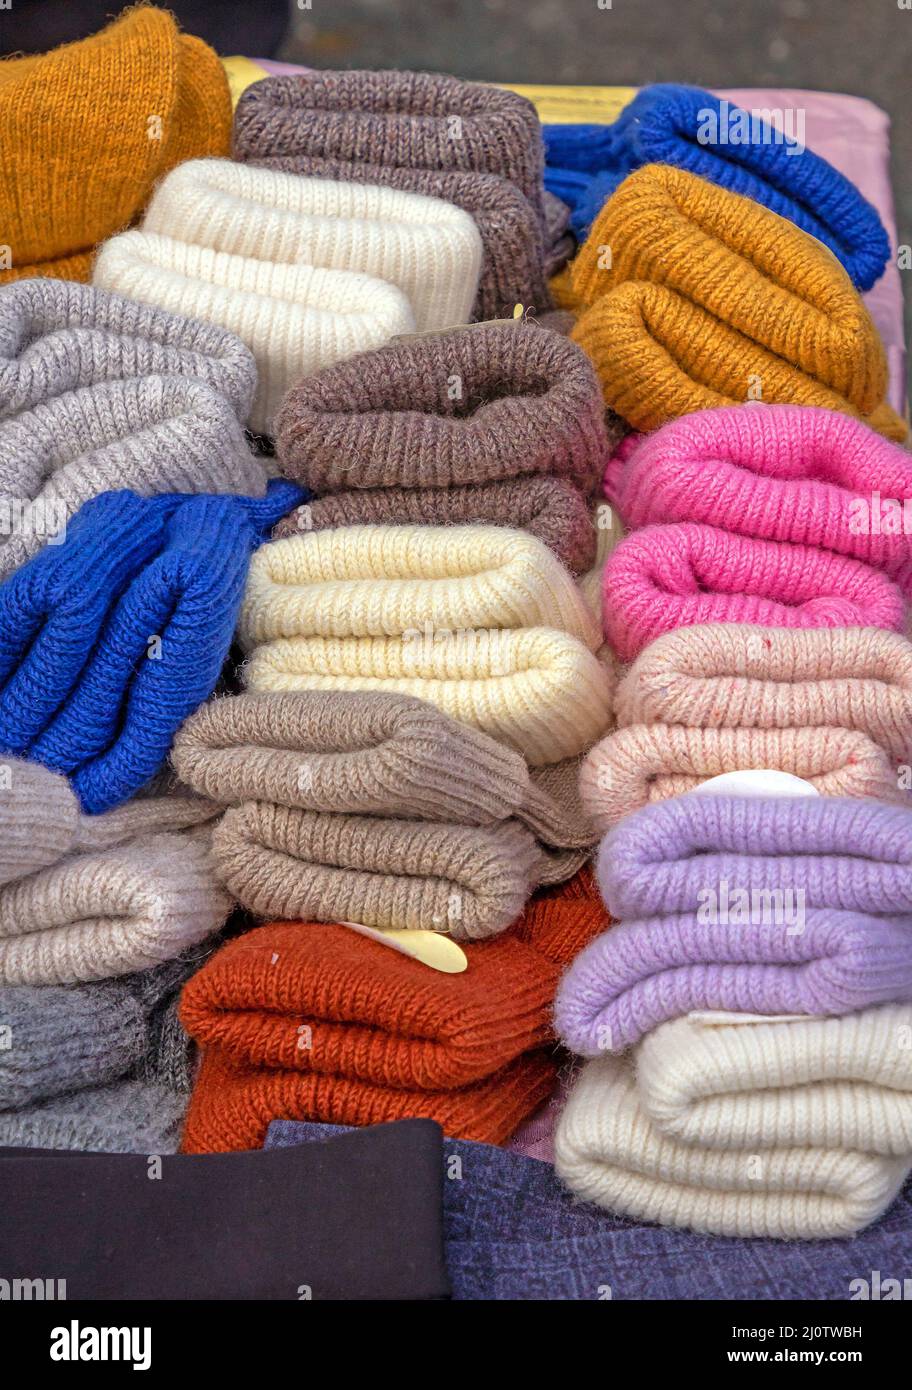 Colorful warm wool gloves pile sold on market stall Stock Photo